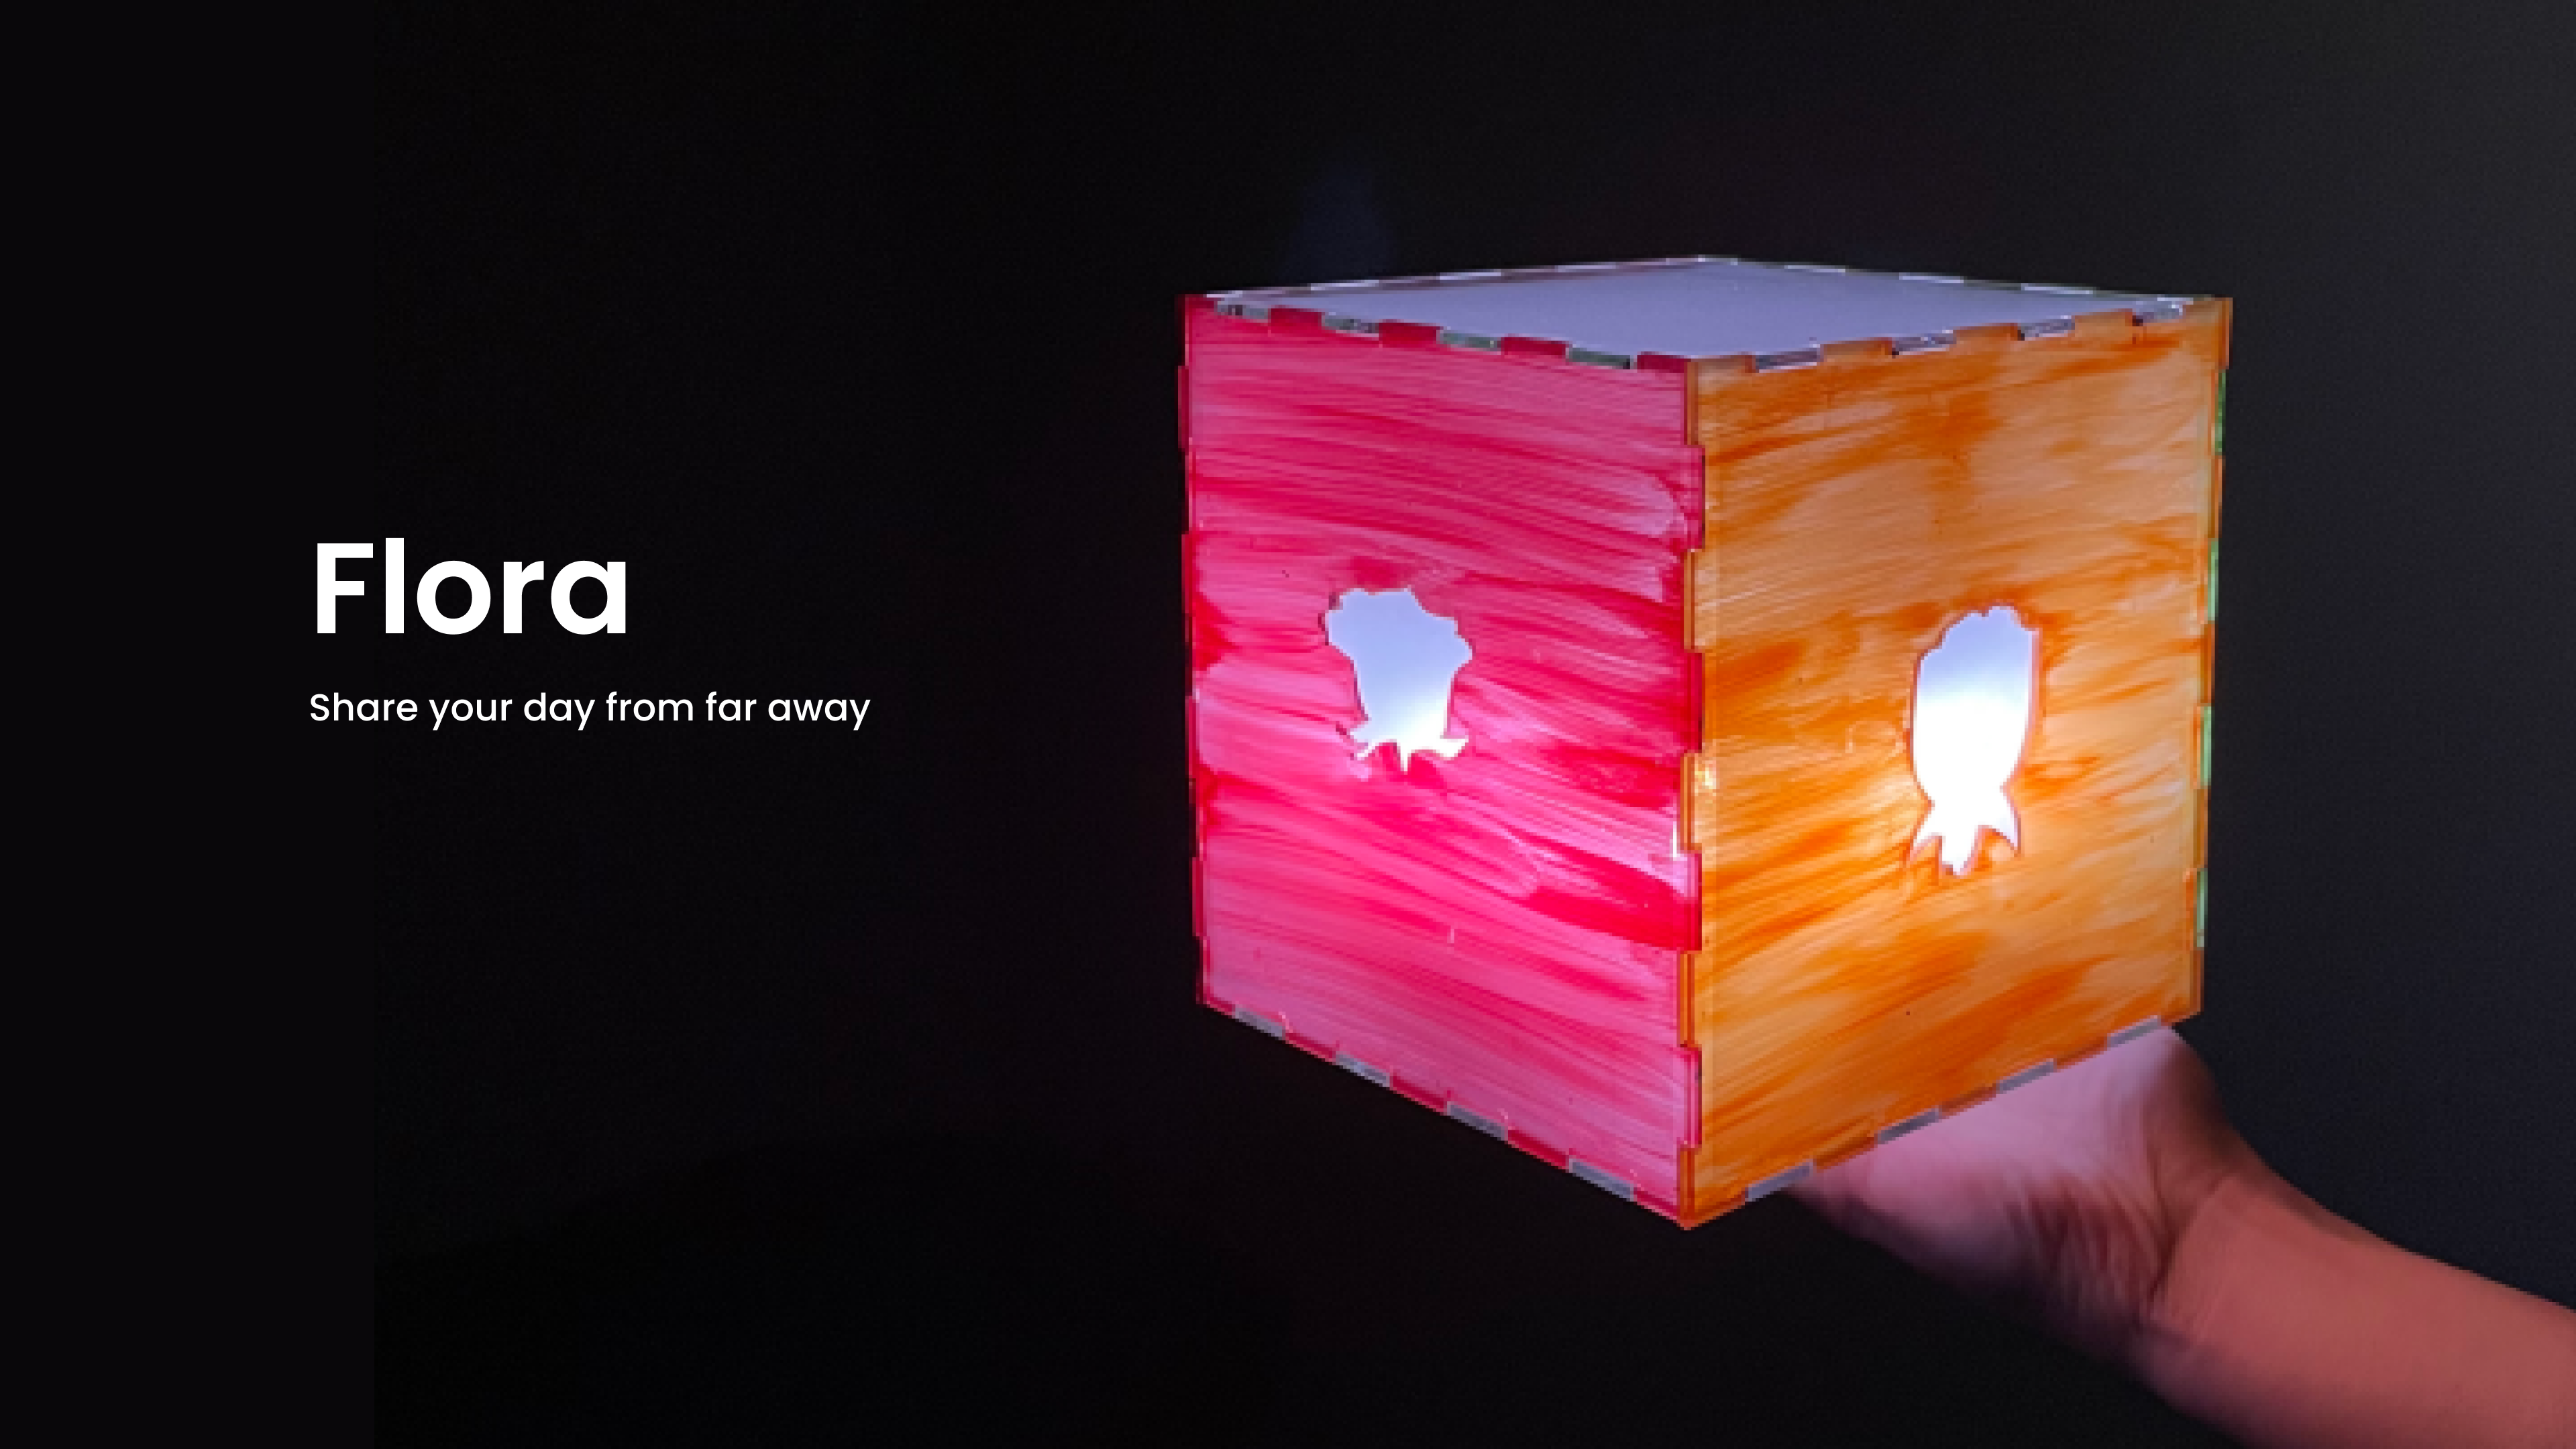 hero image of flora the interactive refletion cube